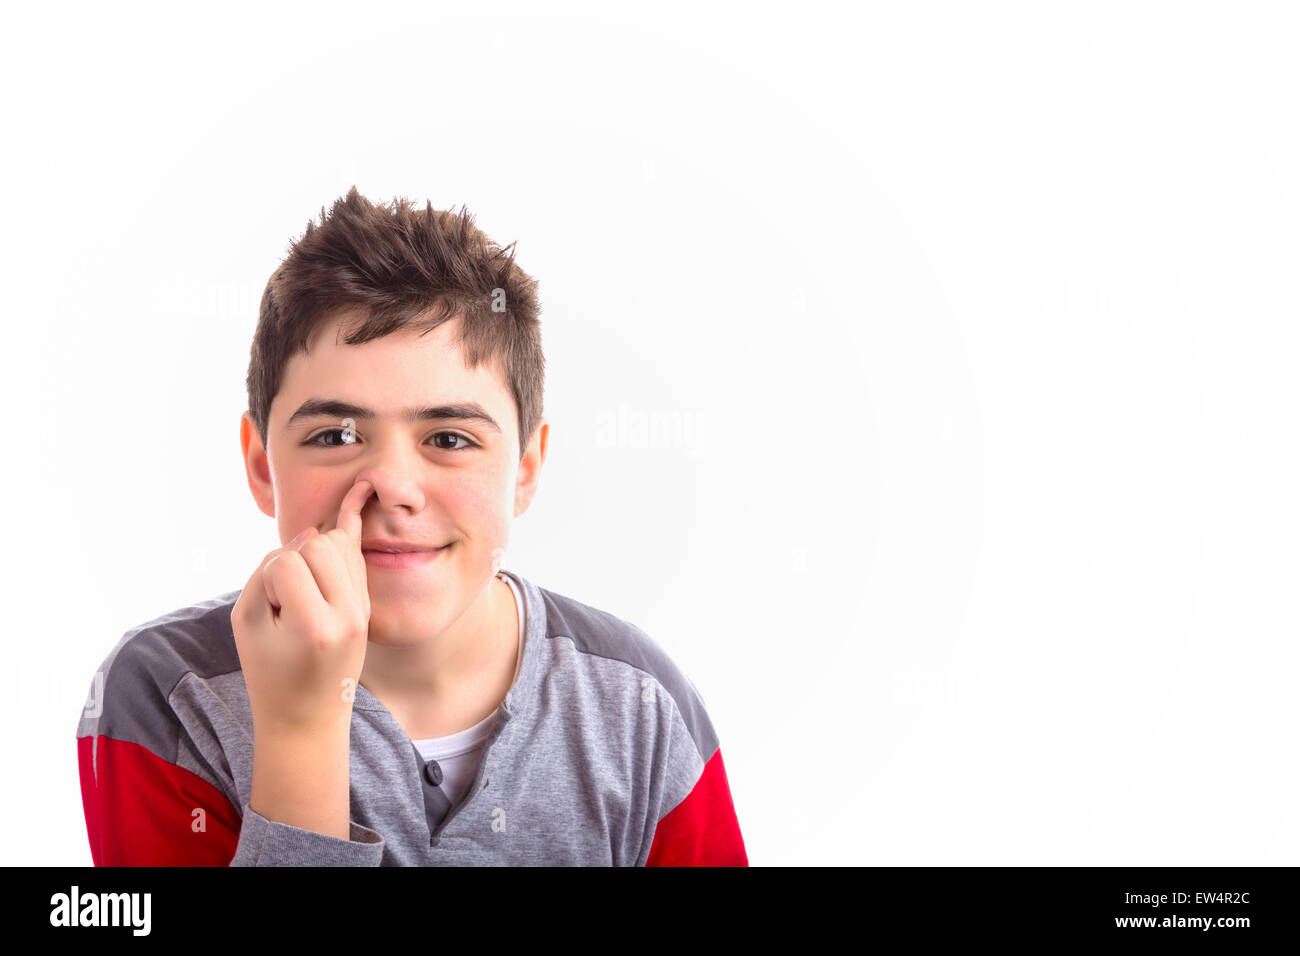 Caucasian boy in red and grey pajamas child picks his nose painting a quizzical smile Stock Photo